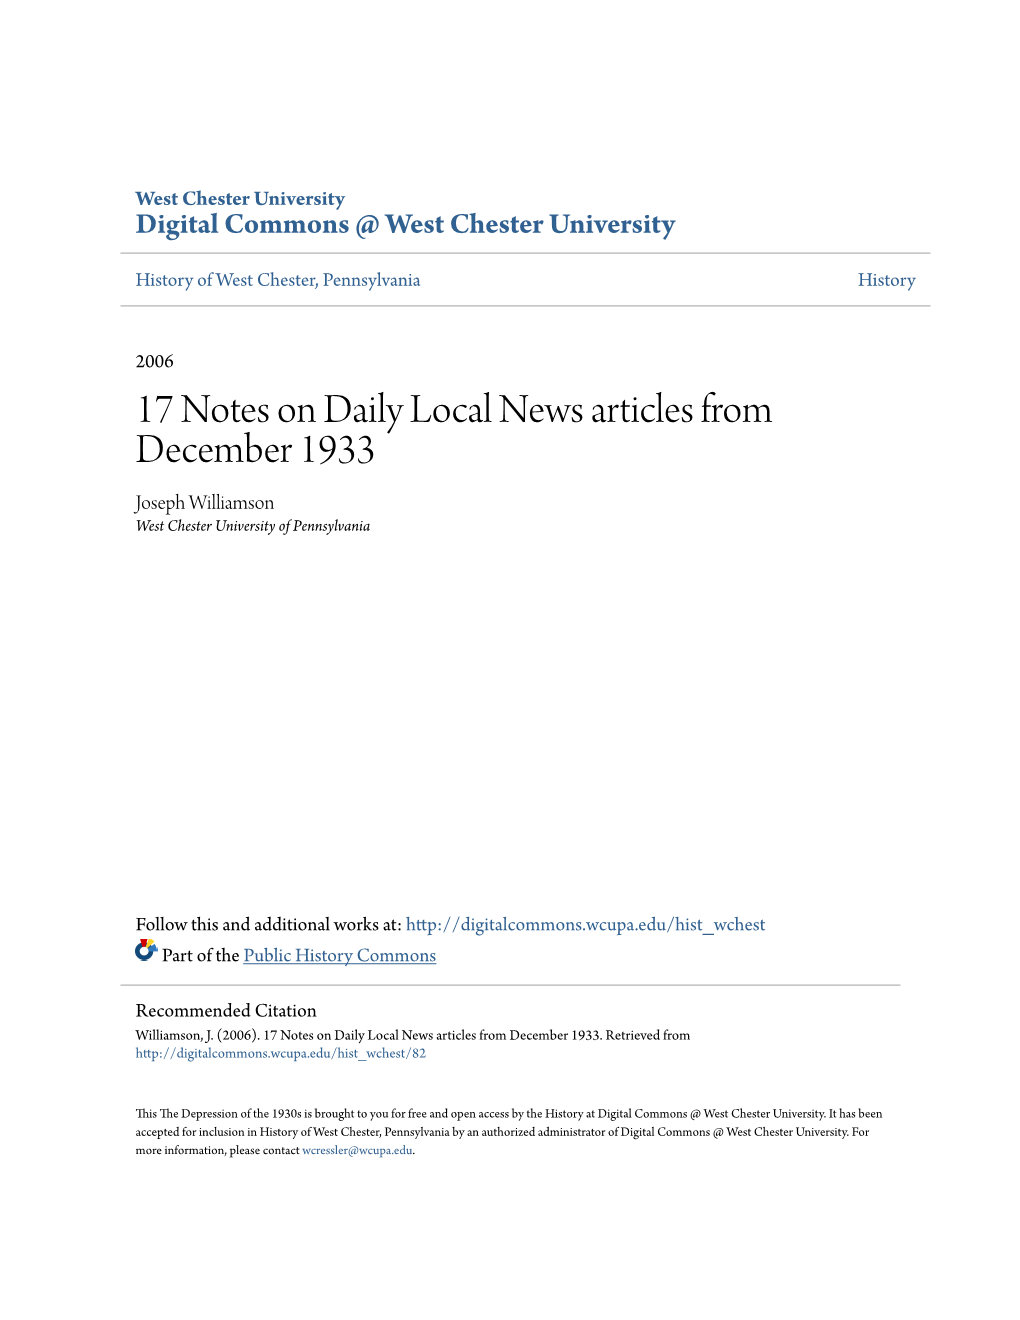 17 Notes on Daily Local News Articles from December 1933 Joseph Williamson West Chester University of Pennsylvania